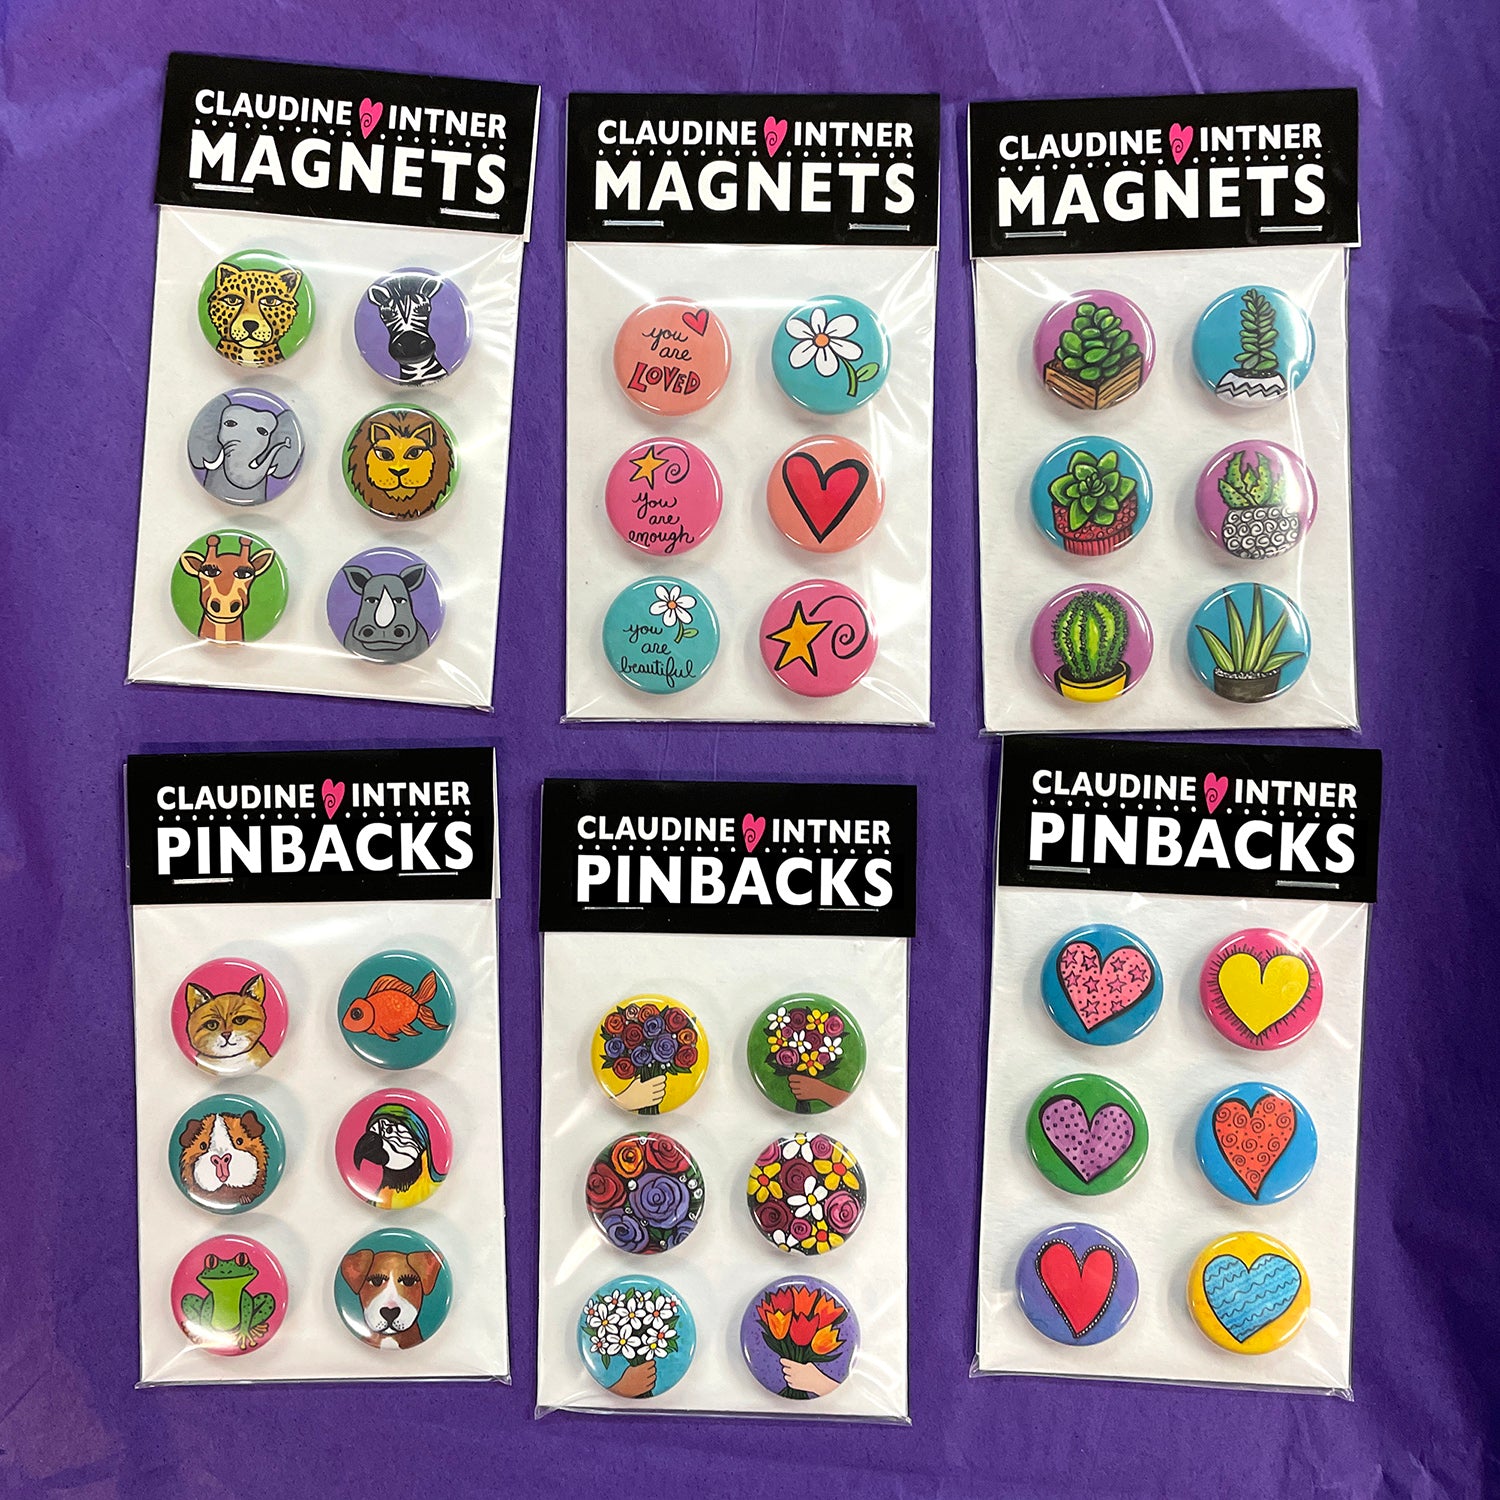 Heart Magnets or Heart Pins